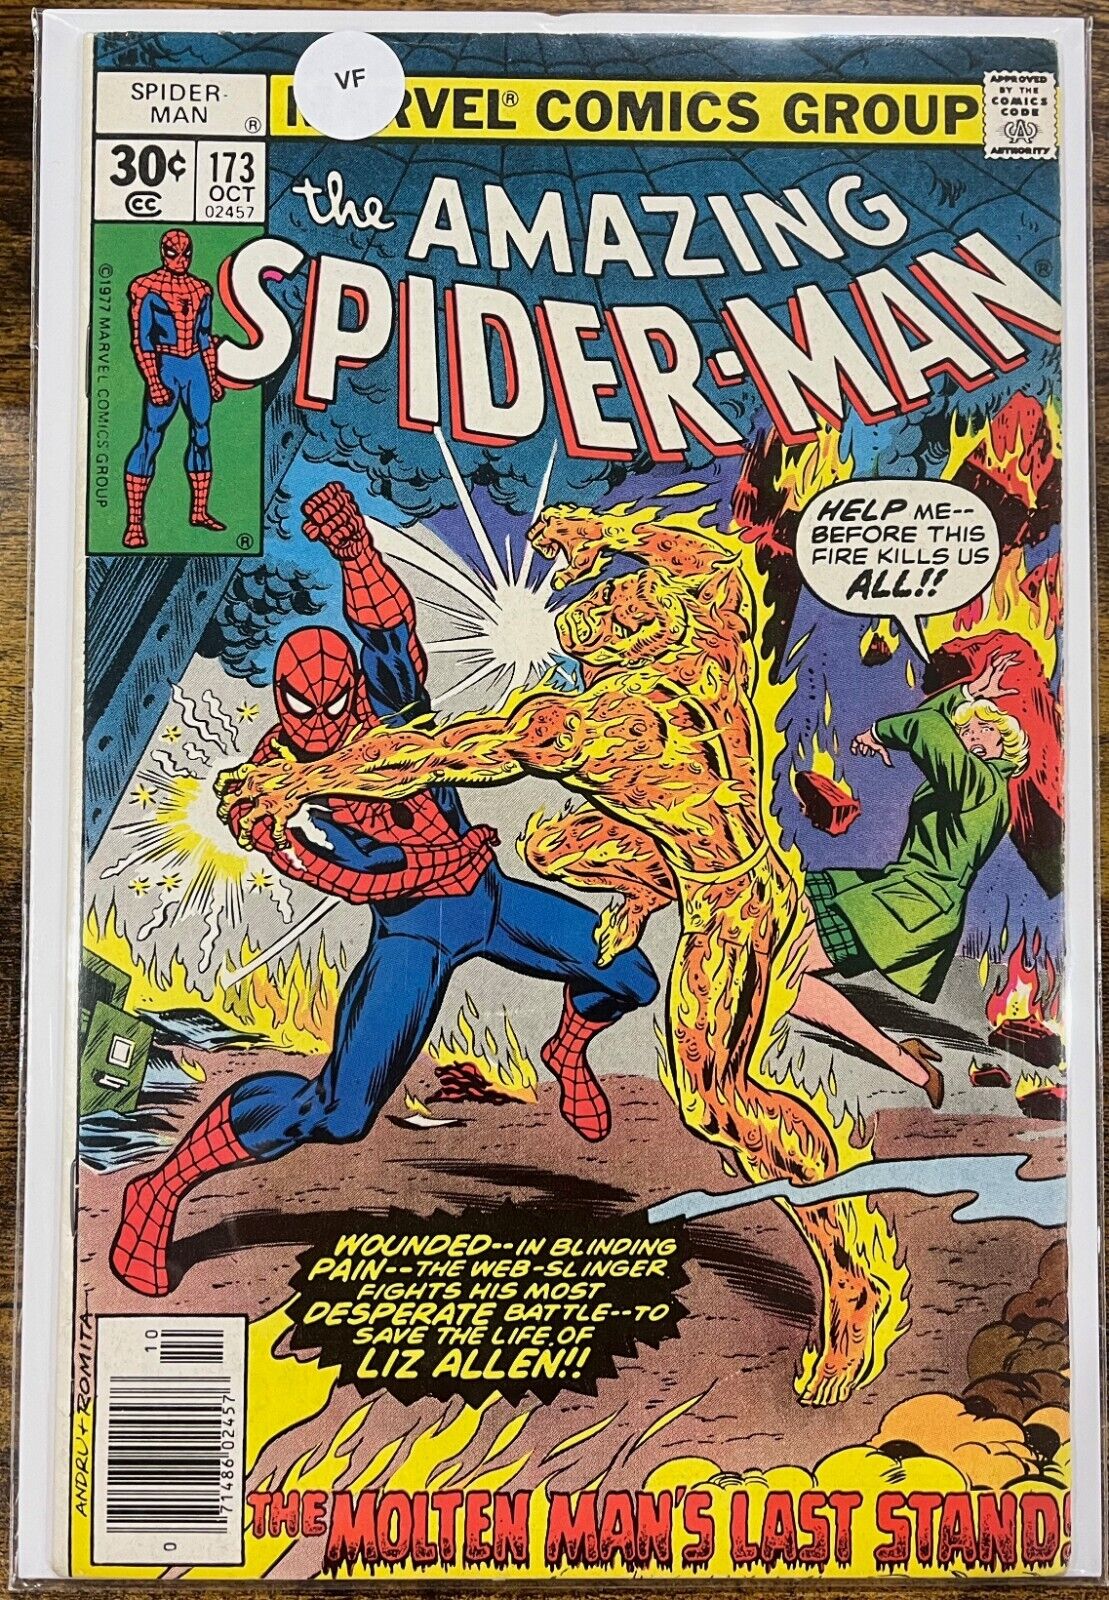 The Amazing Spider-Man volume 1 (F to NM - choose your issue)